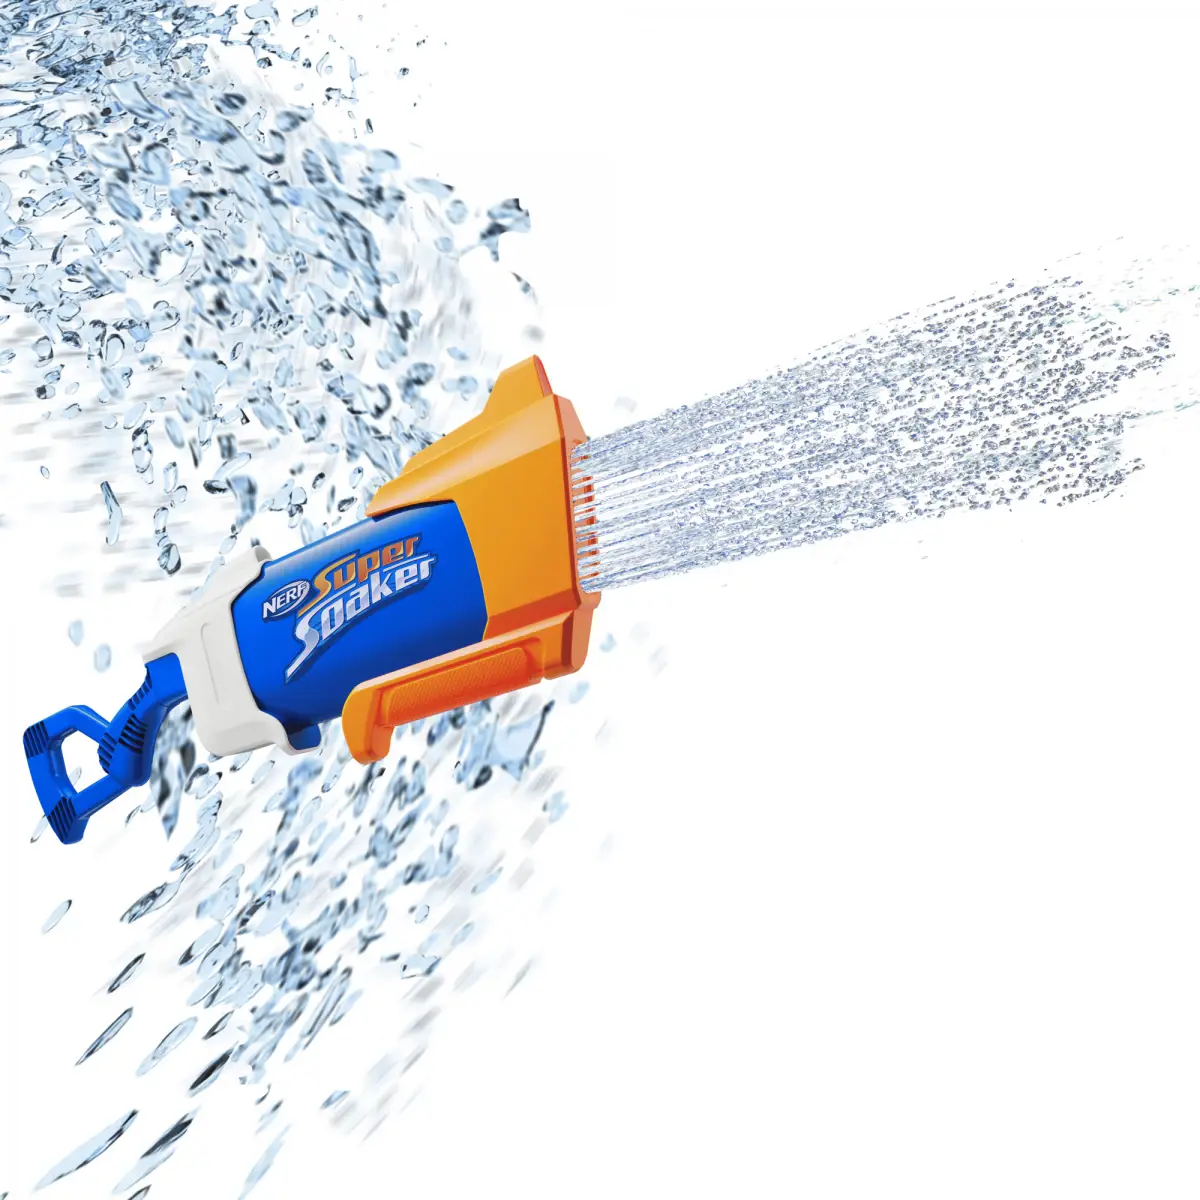 Nerf Super Soaker Rainstorm Water Blaster, Drenching Water Blast, Outdoor Water Blasting Fun, Easy Fill and Blast for 6Y+